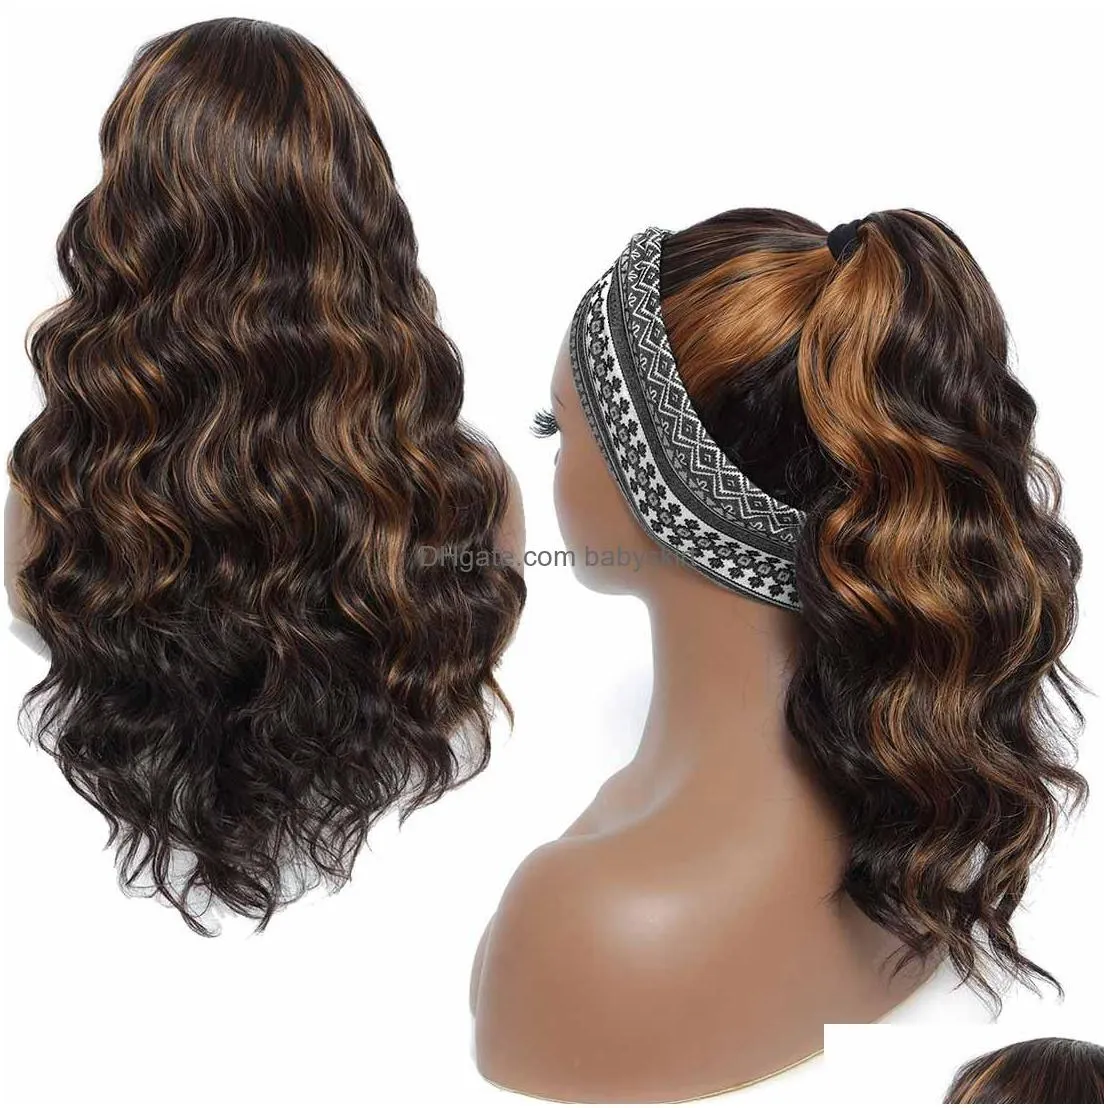 Lace Wigs Long Deep Wave Fl Lace Front Wigs Human Hair Curly 10 Styles Female Synthetic Natural Fast Drop Delivery Hair Products Hair Dhbeh